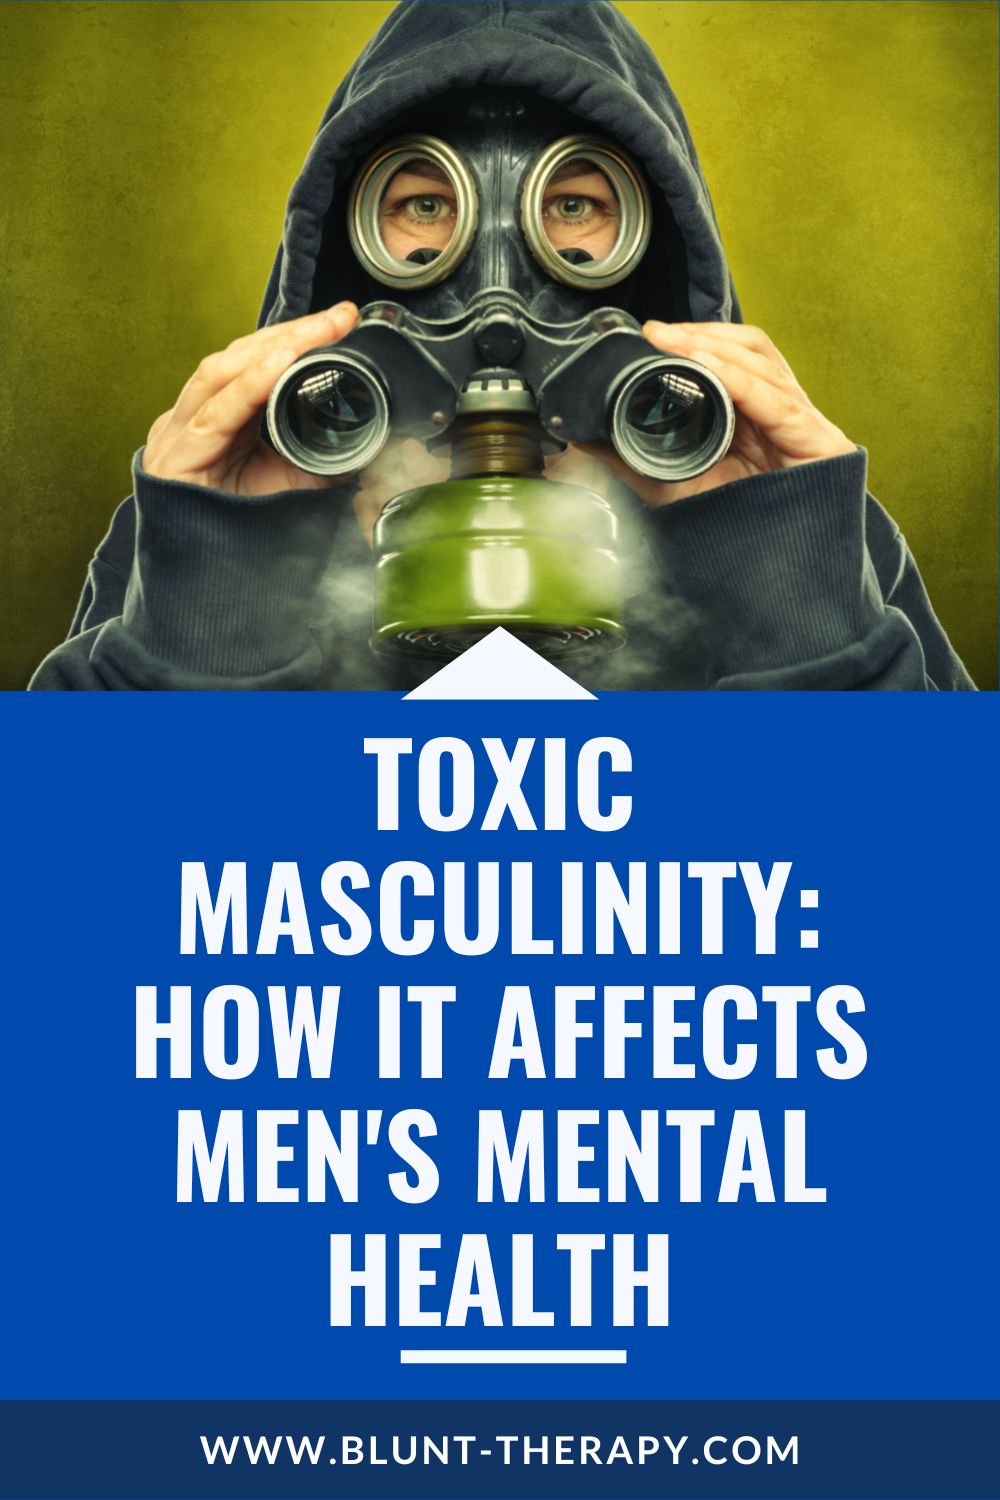 Toxic Masculinity: How it Affects Men's Mental Health